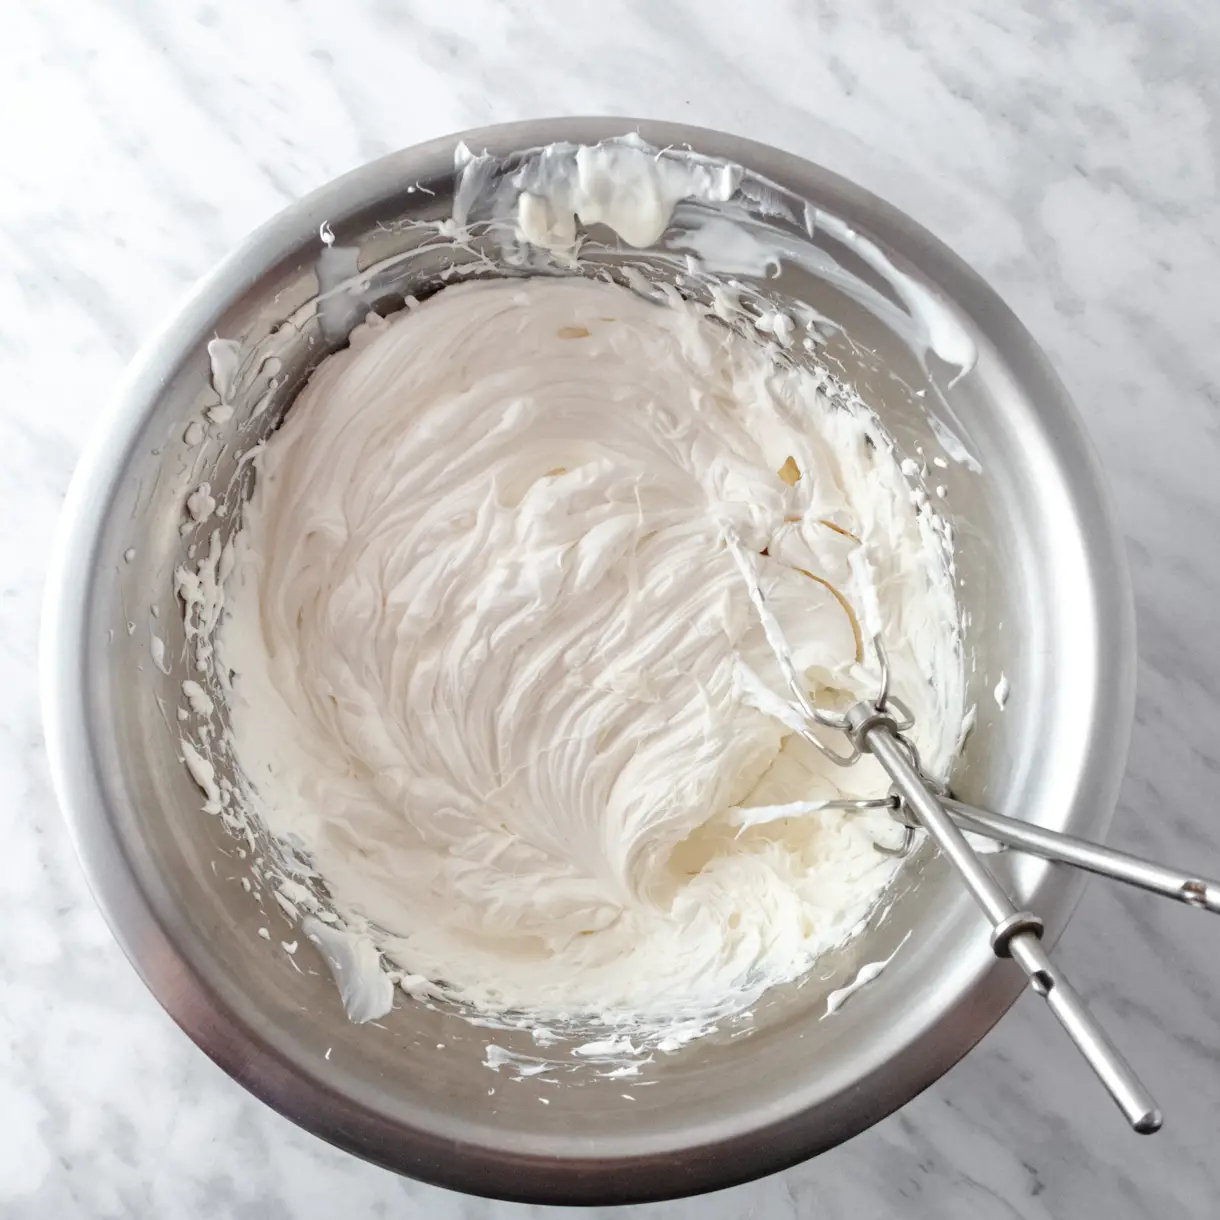 Vegan whipping cream (Ambiante by Puratos) doubled in size after being whipped with the beaters still in the bowl.